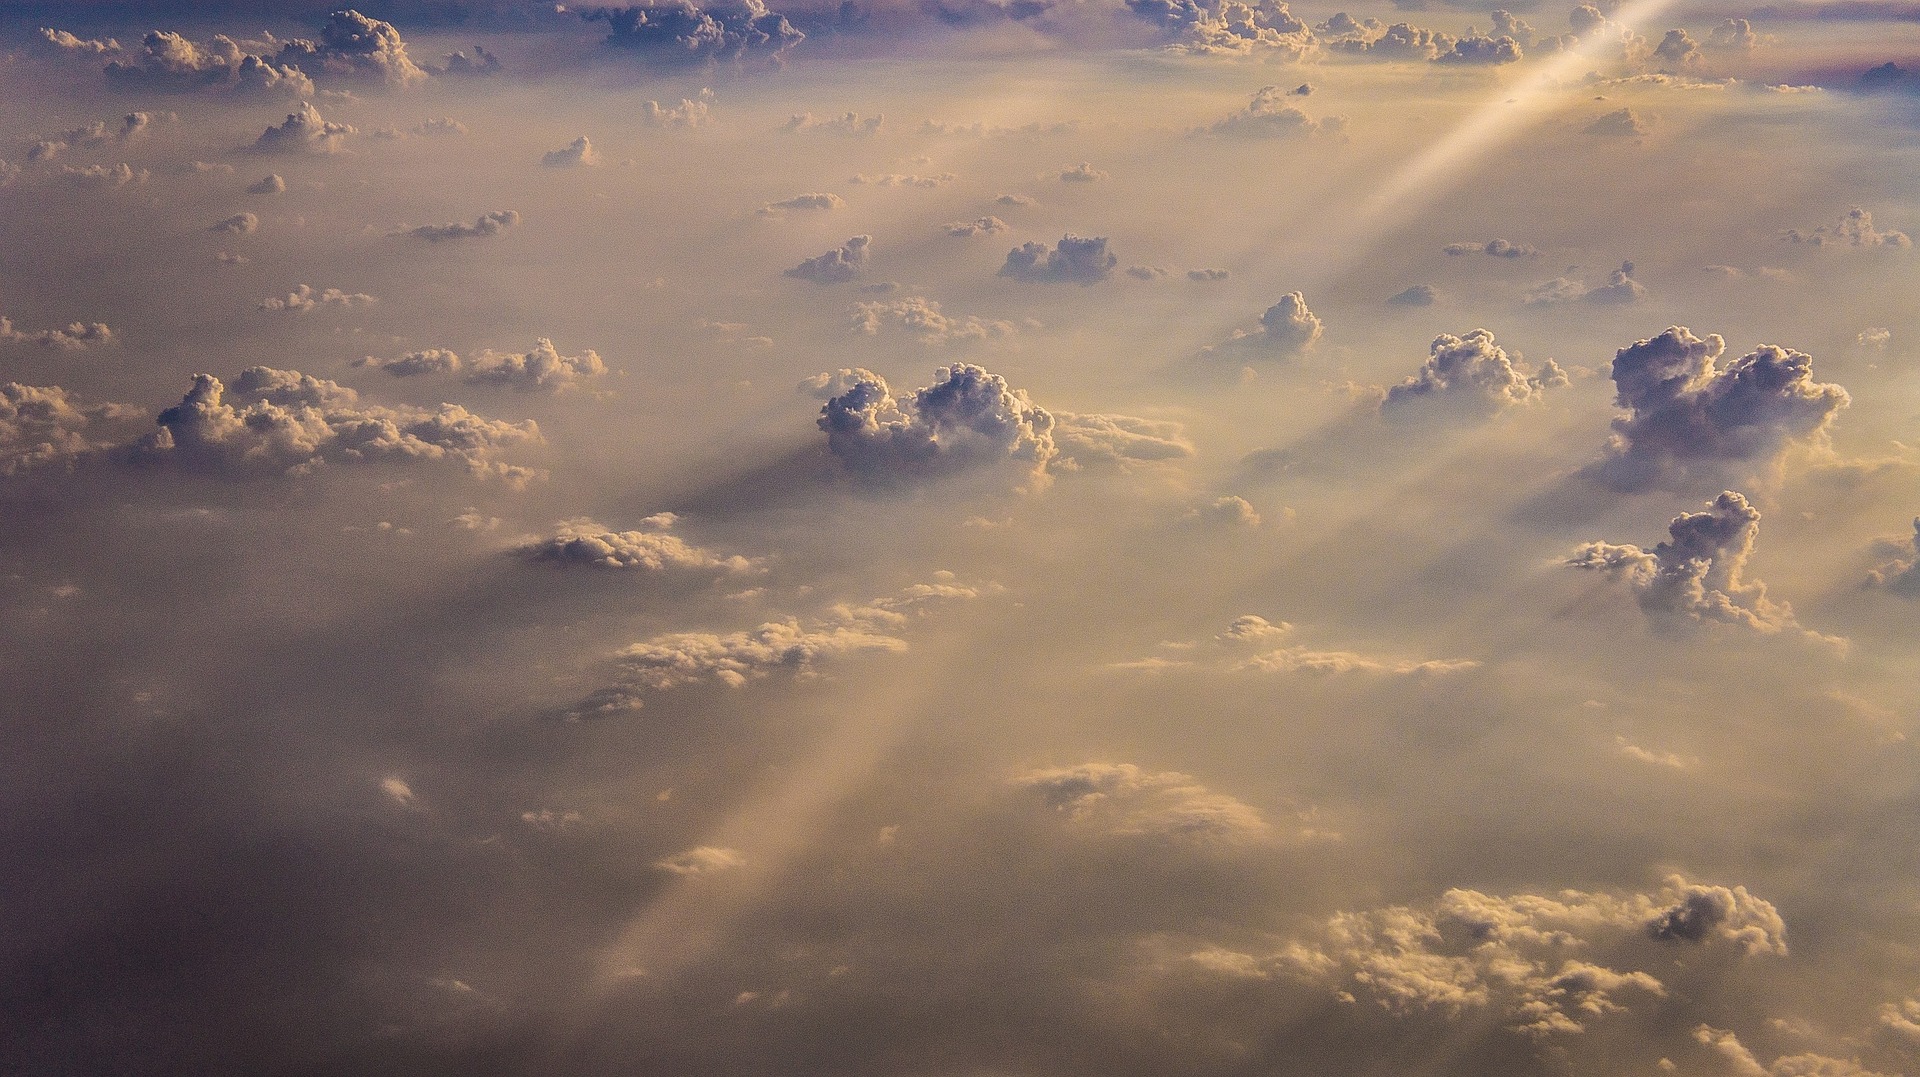 above-the-clouds-692164_1920.jpg